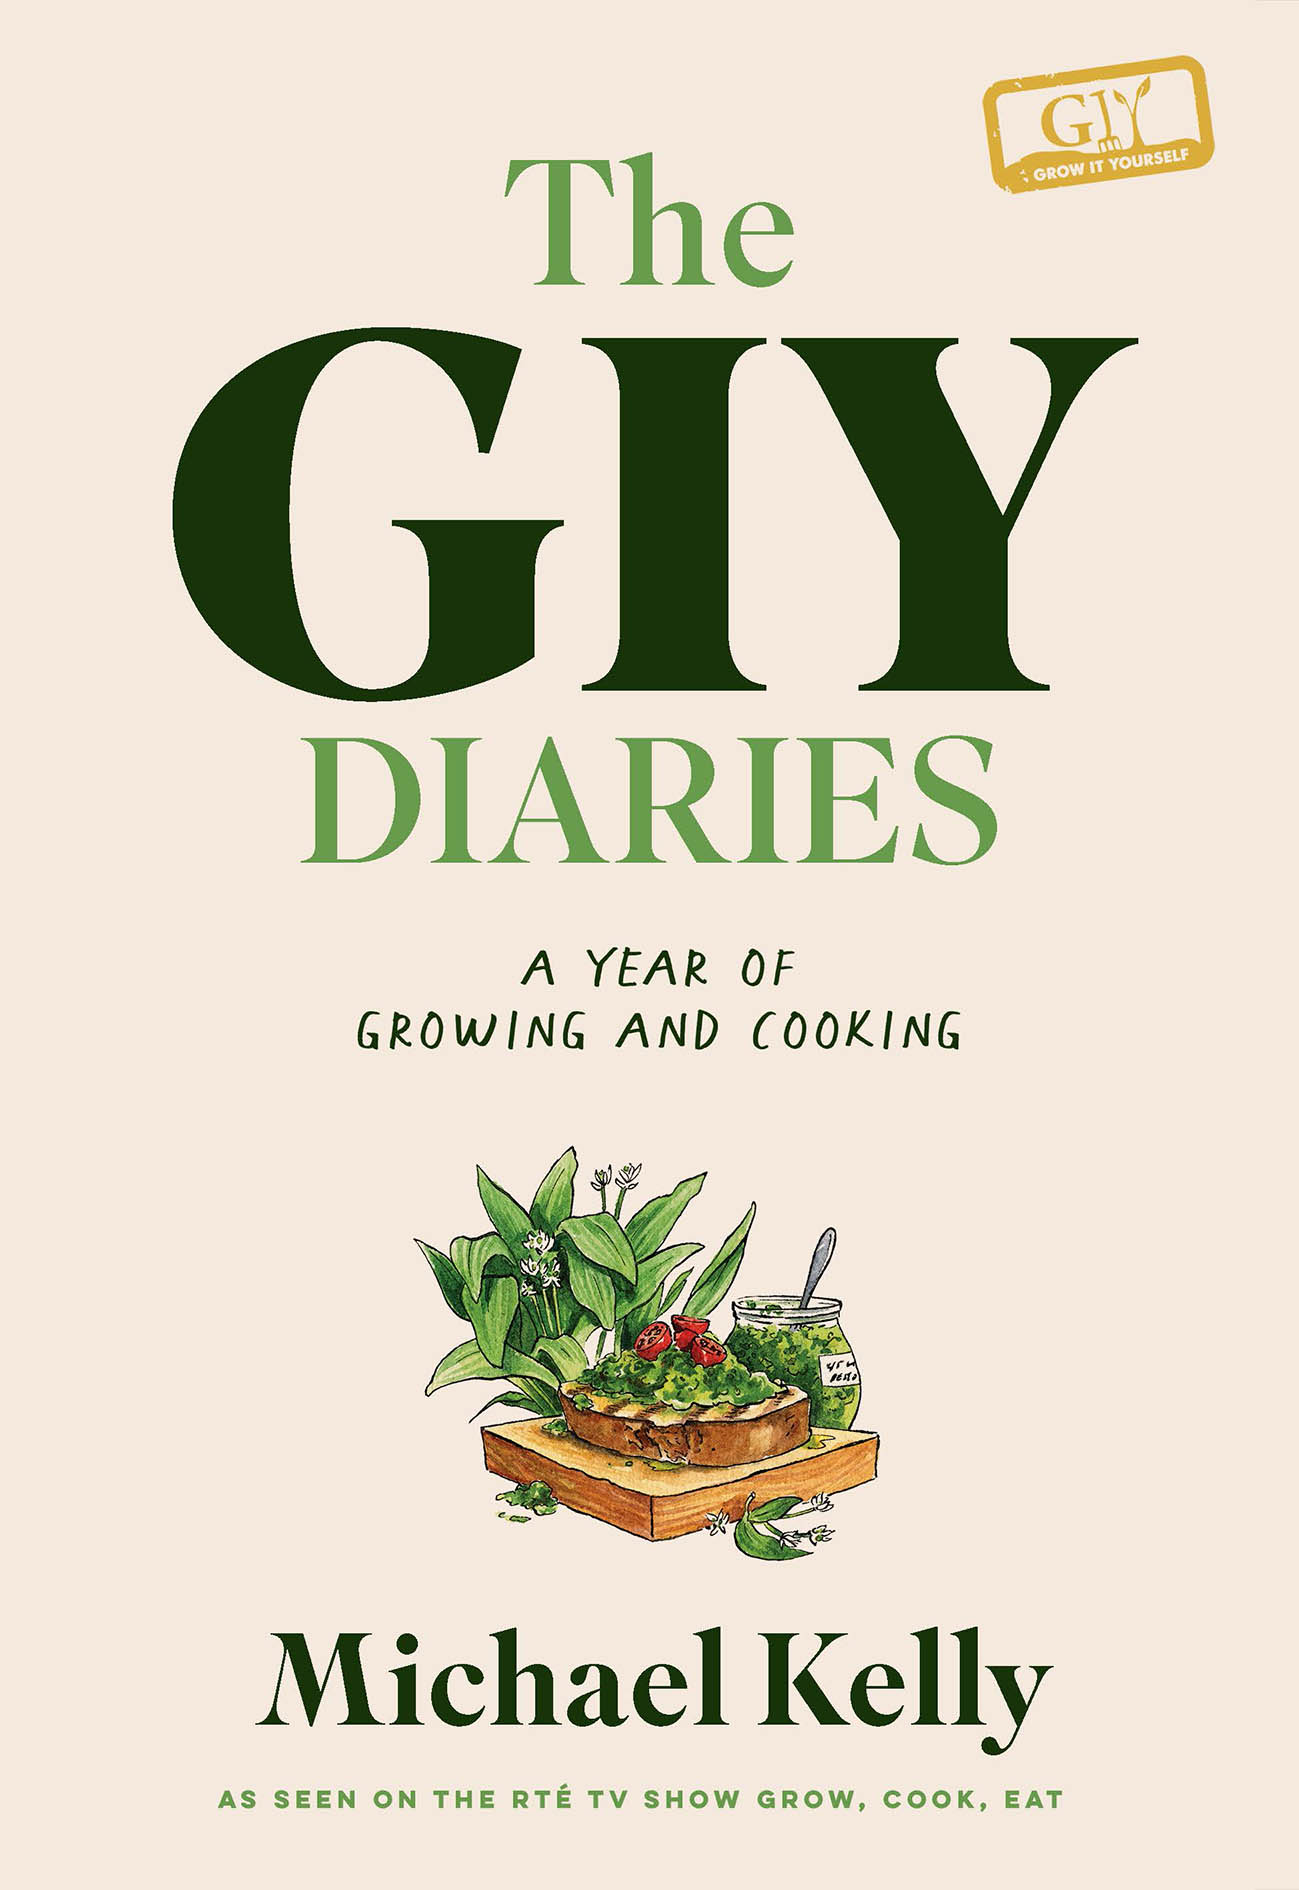 The GIY Diaries - A Year of Growing and Cooking by Michael Kelly